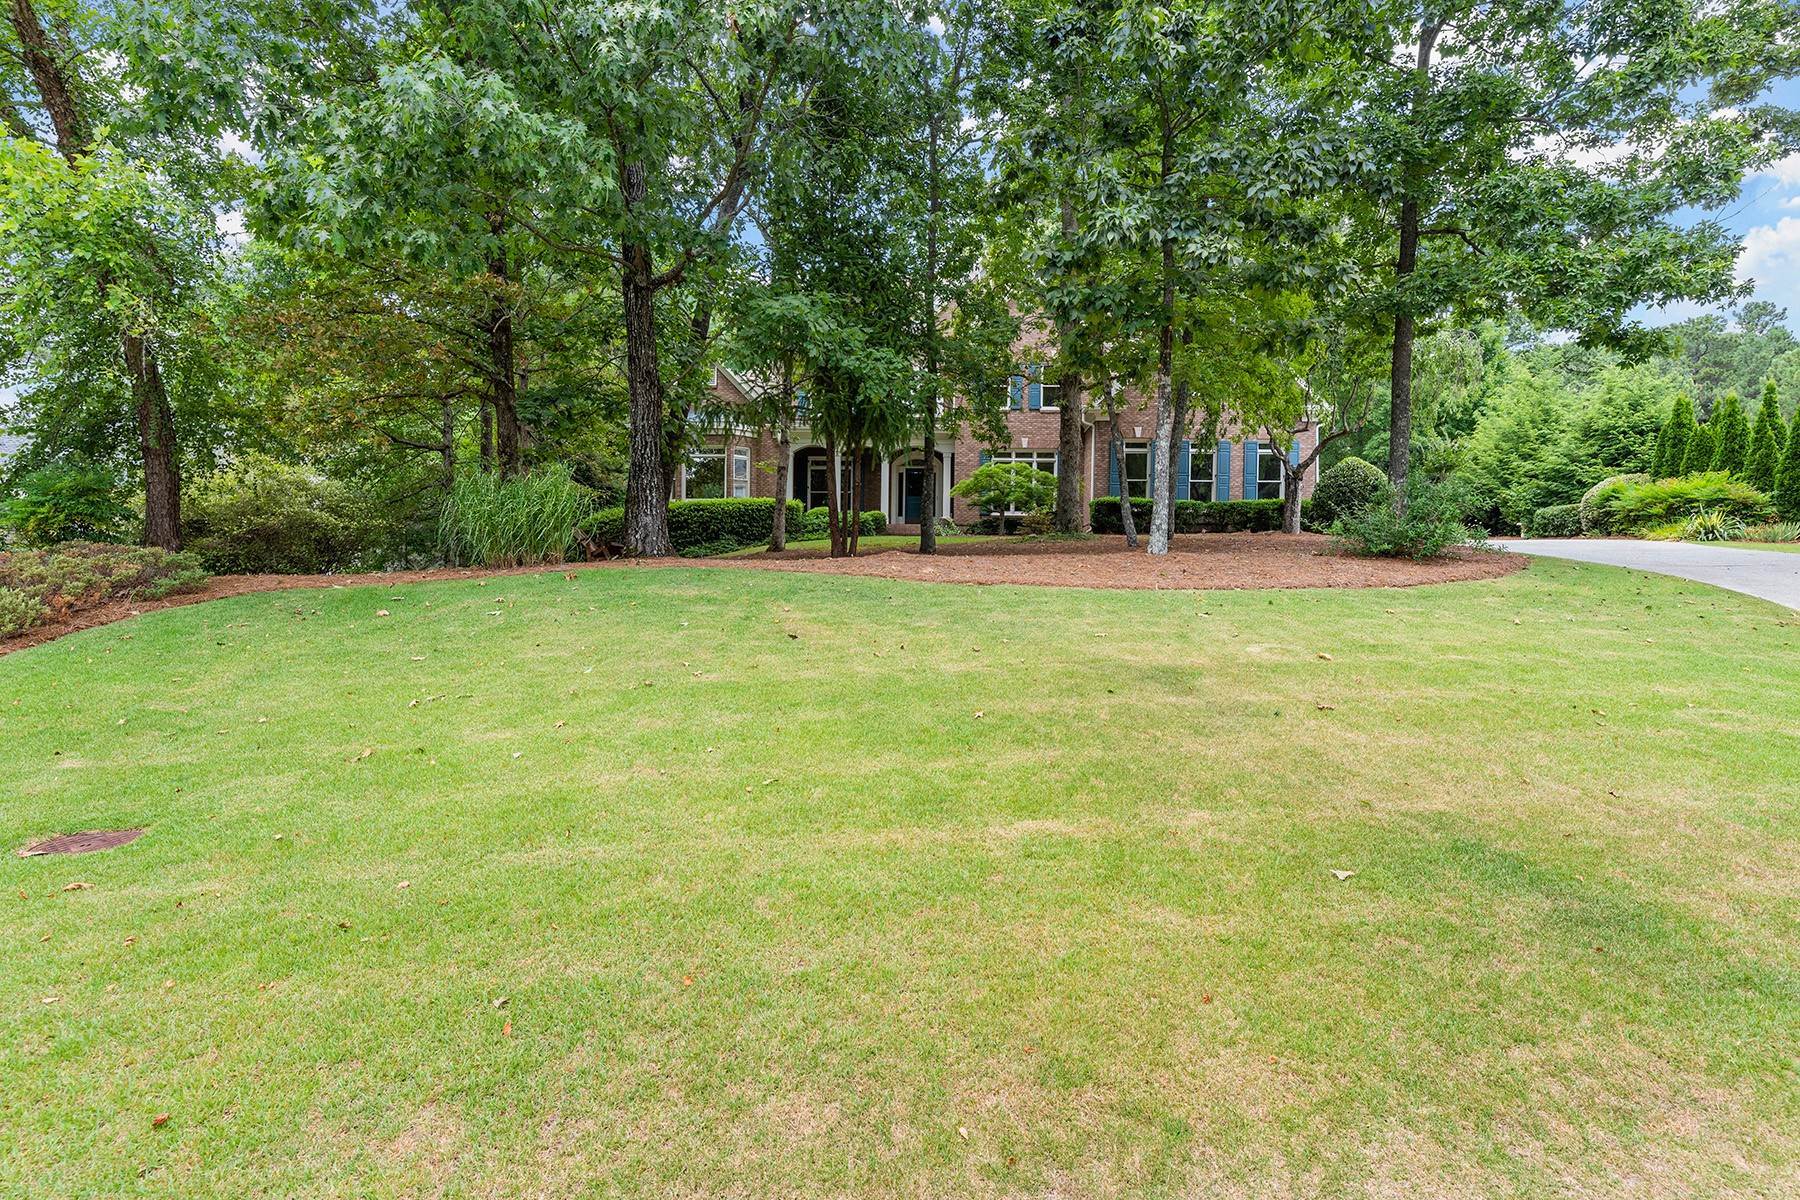 46. Single Family Homes for Sale at Custom-Built Home with Main Floor Owner's Suite in Gated Windward 1430 Portmarnock Drive Alpharetta, Georgia 30005 United States